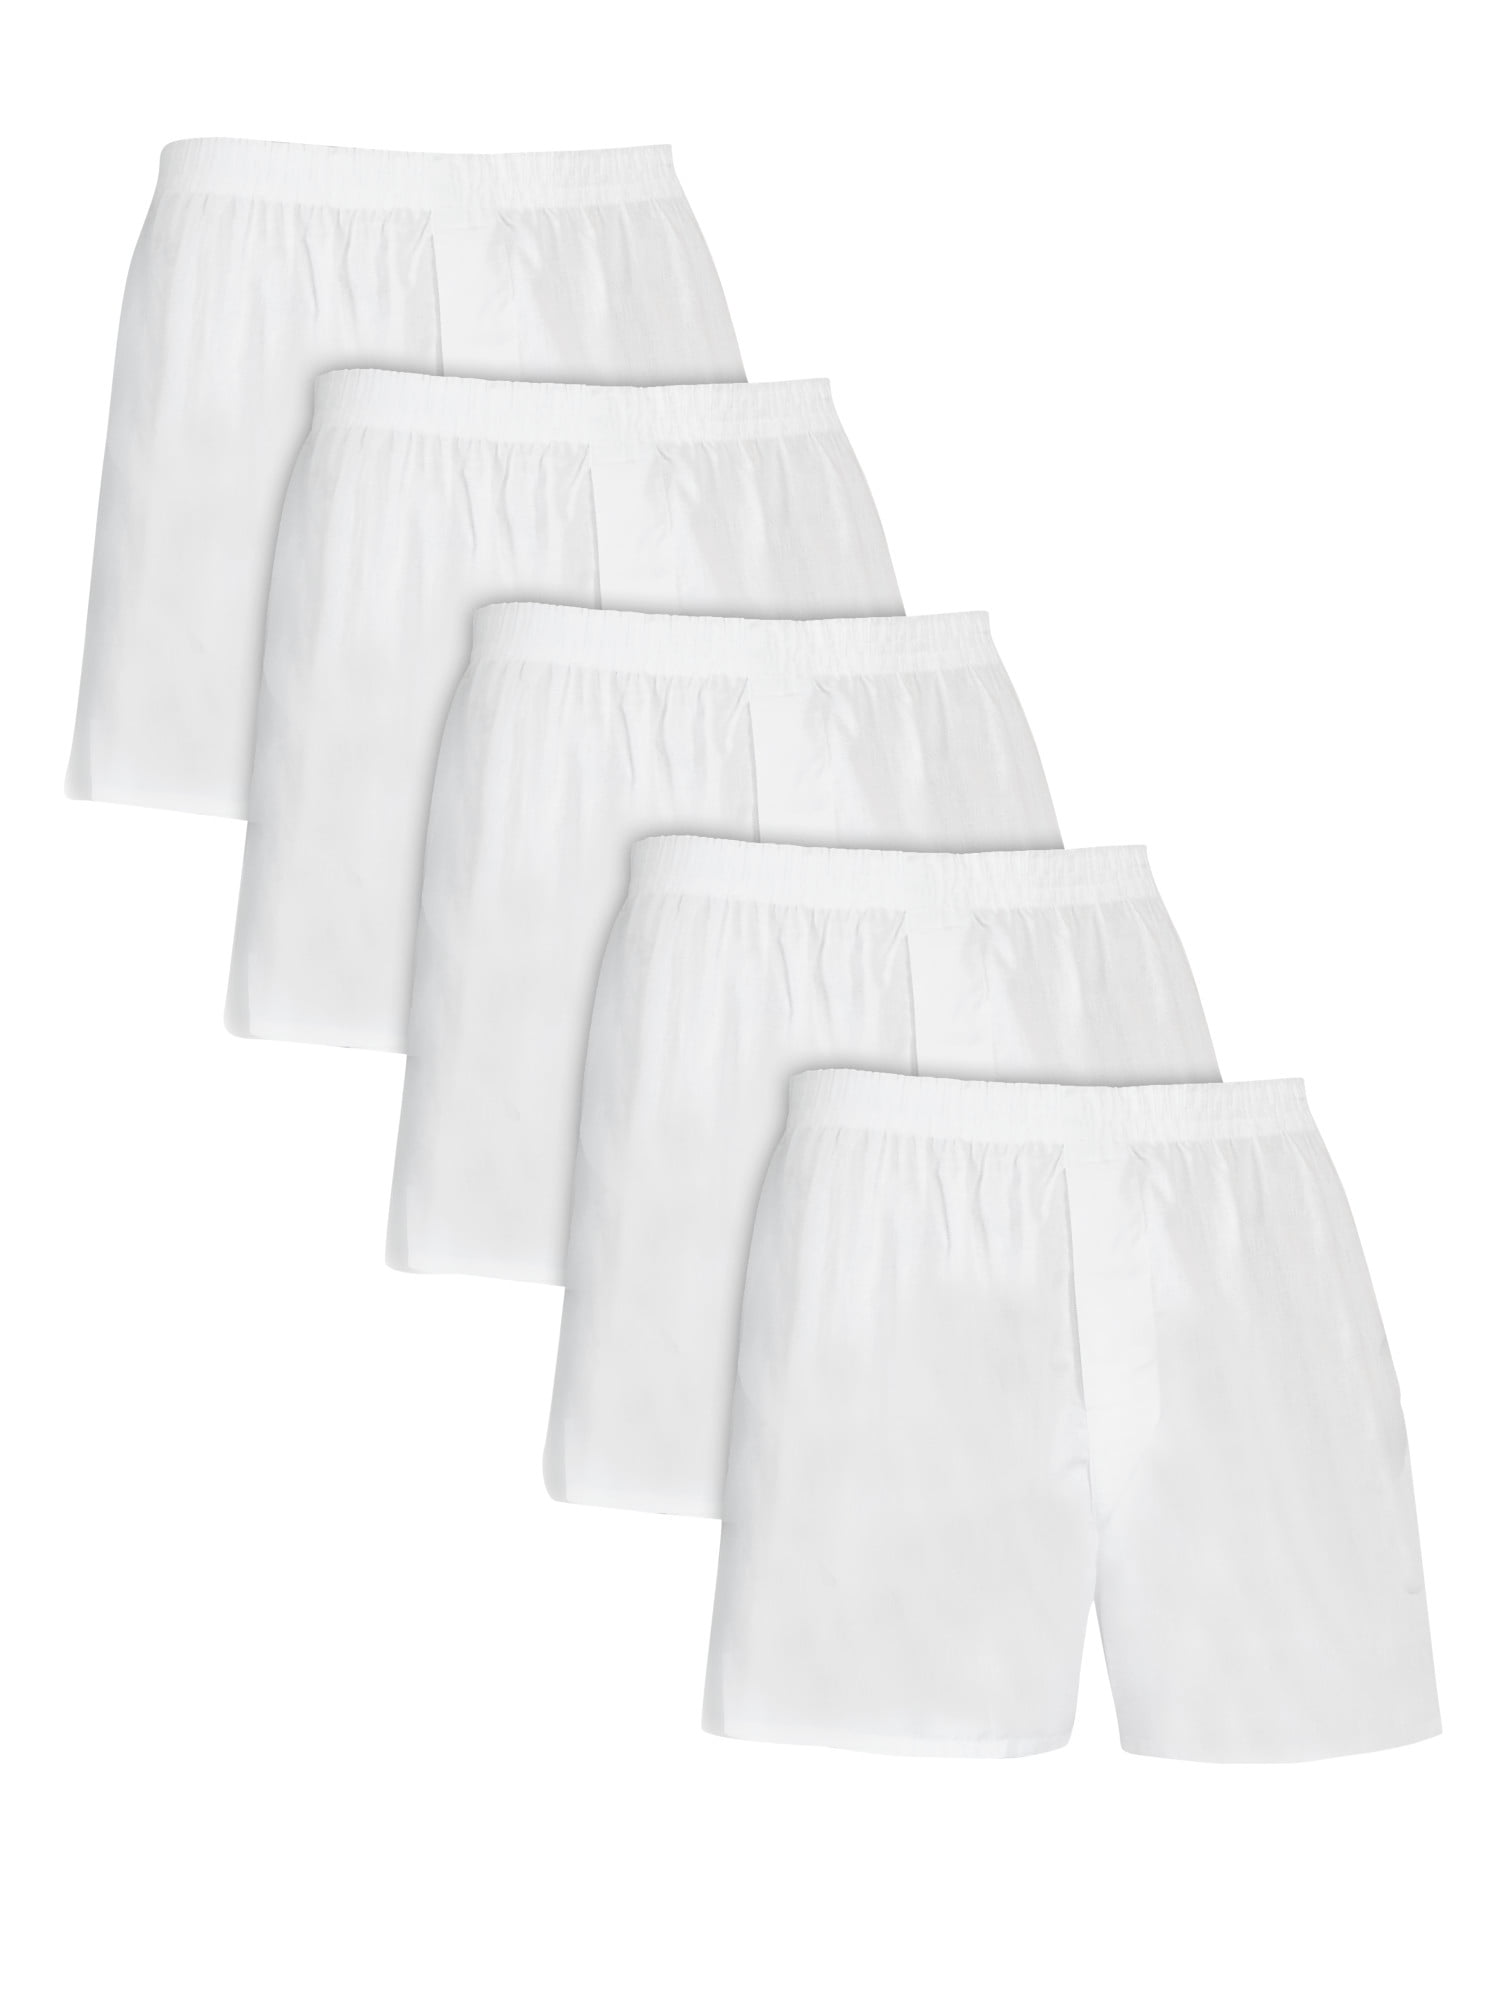 Fruit of the Loom Men's Woven Boxers, 5 Pack, Sizes S-XL - Walmart.com